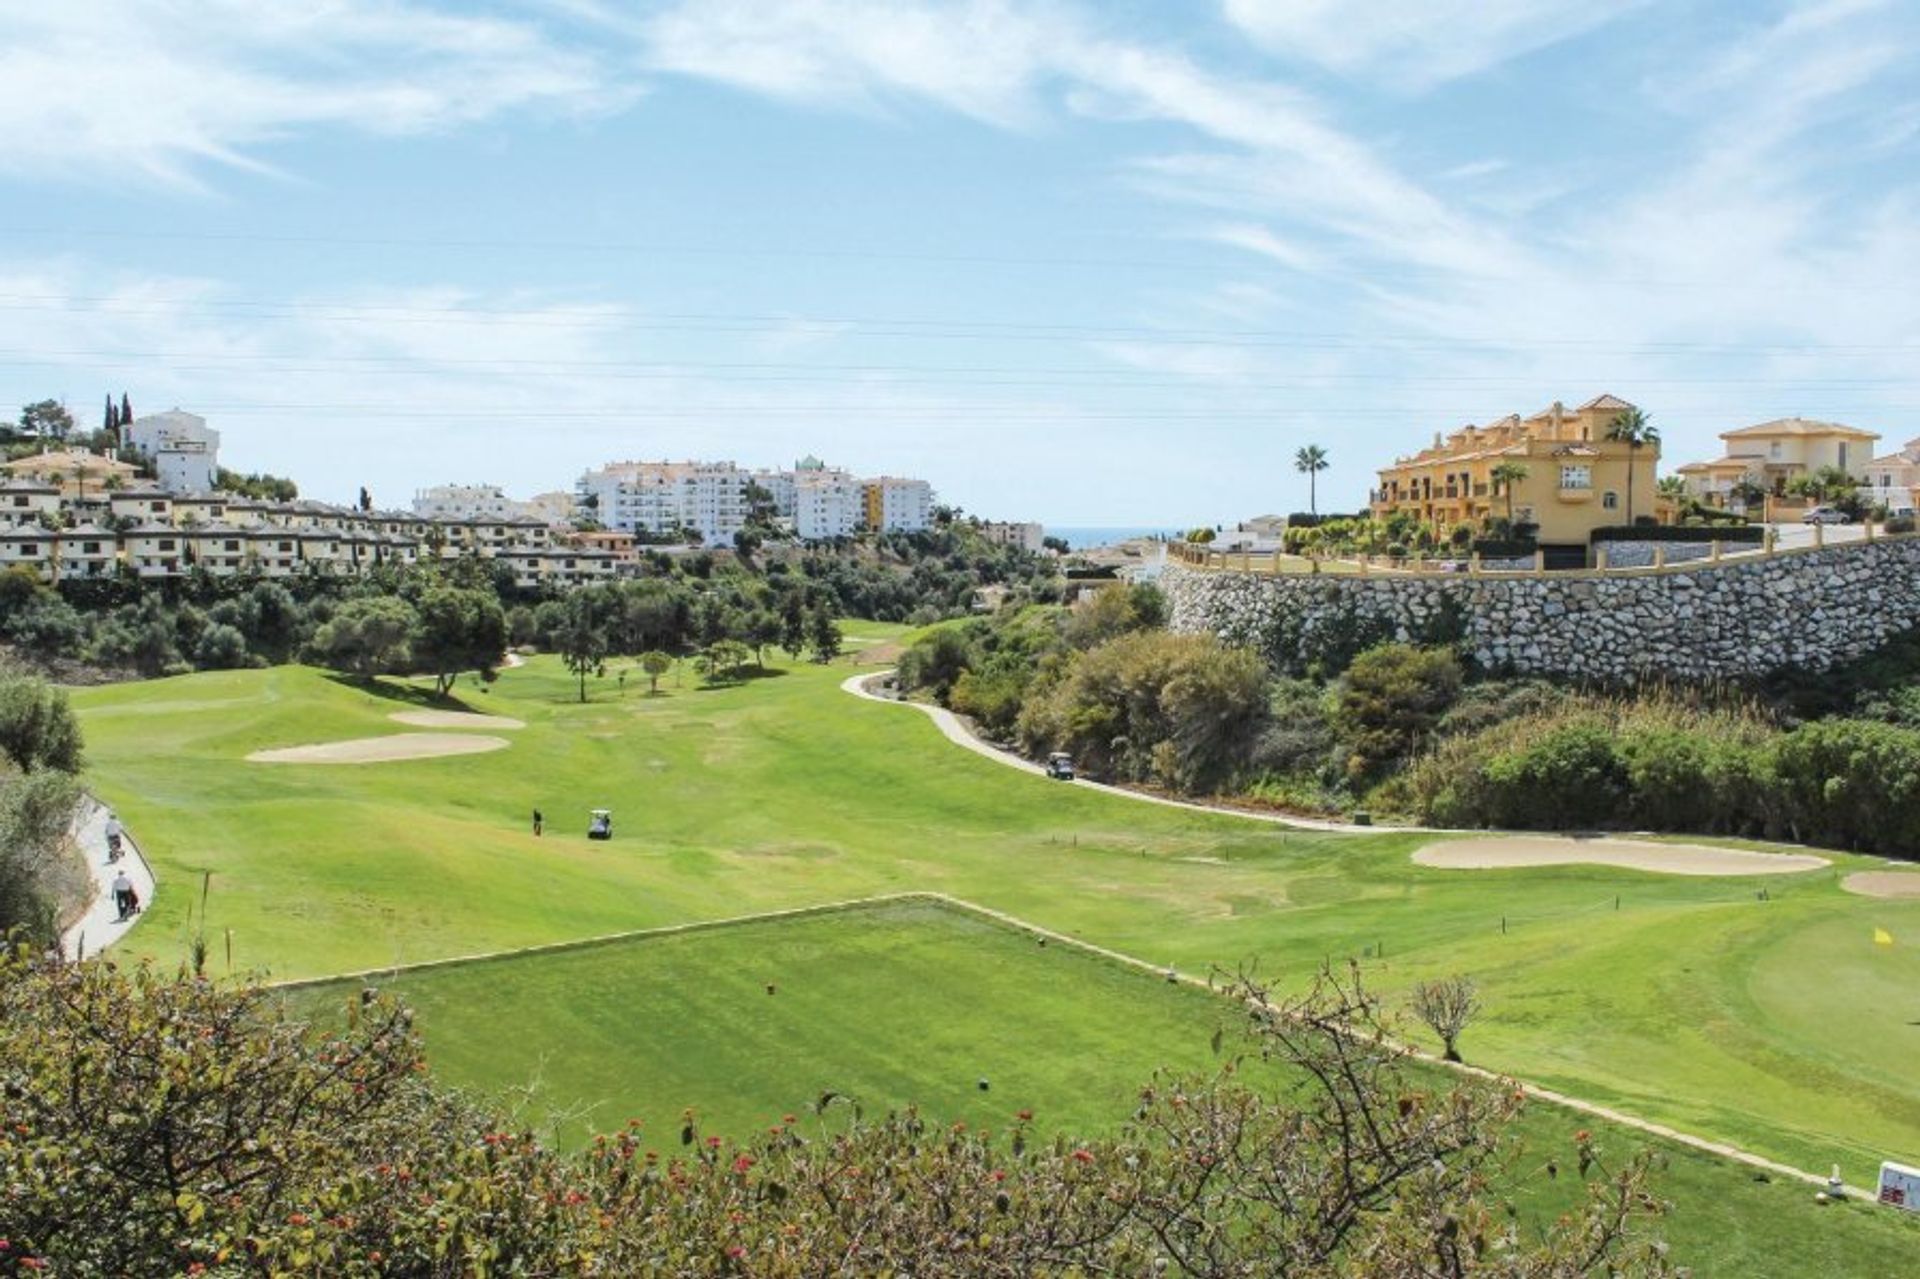 Practice your swing at one of the many golf courses in and around Riviera del Sol